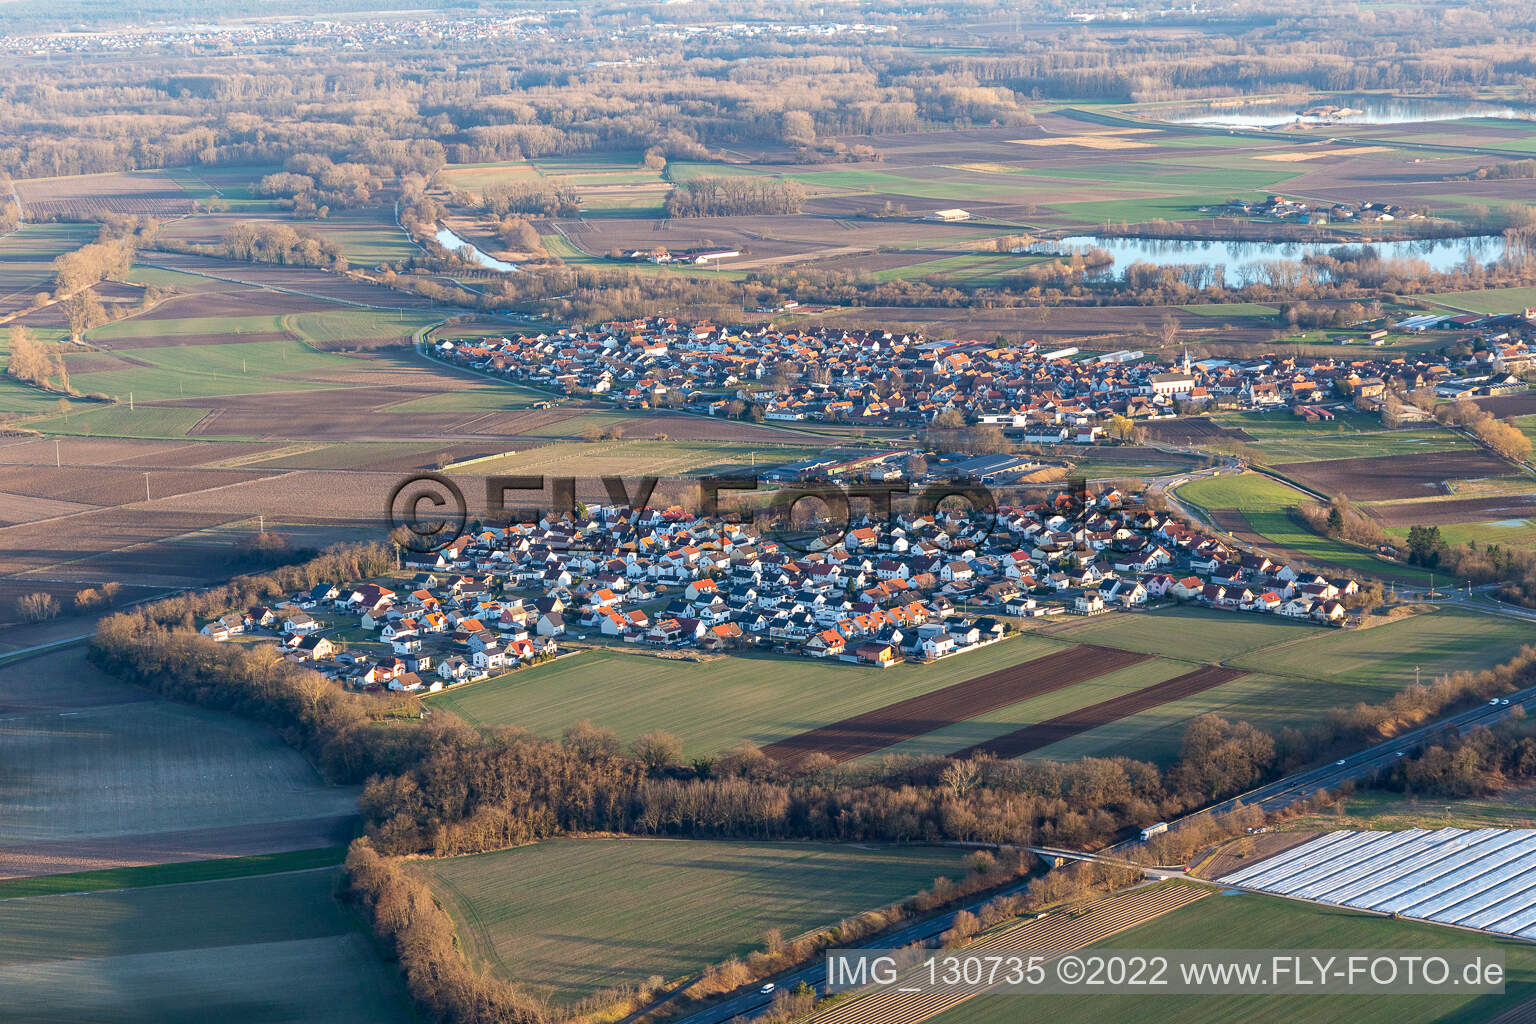 Hardtwald in Neupotz in the state Rhineland-Palatinate, Germany seen from above